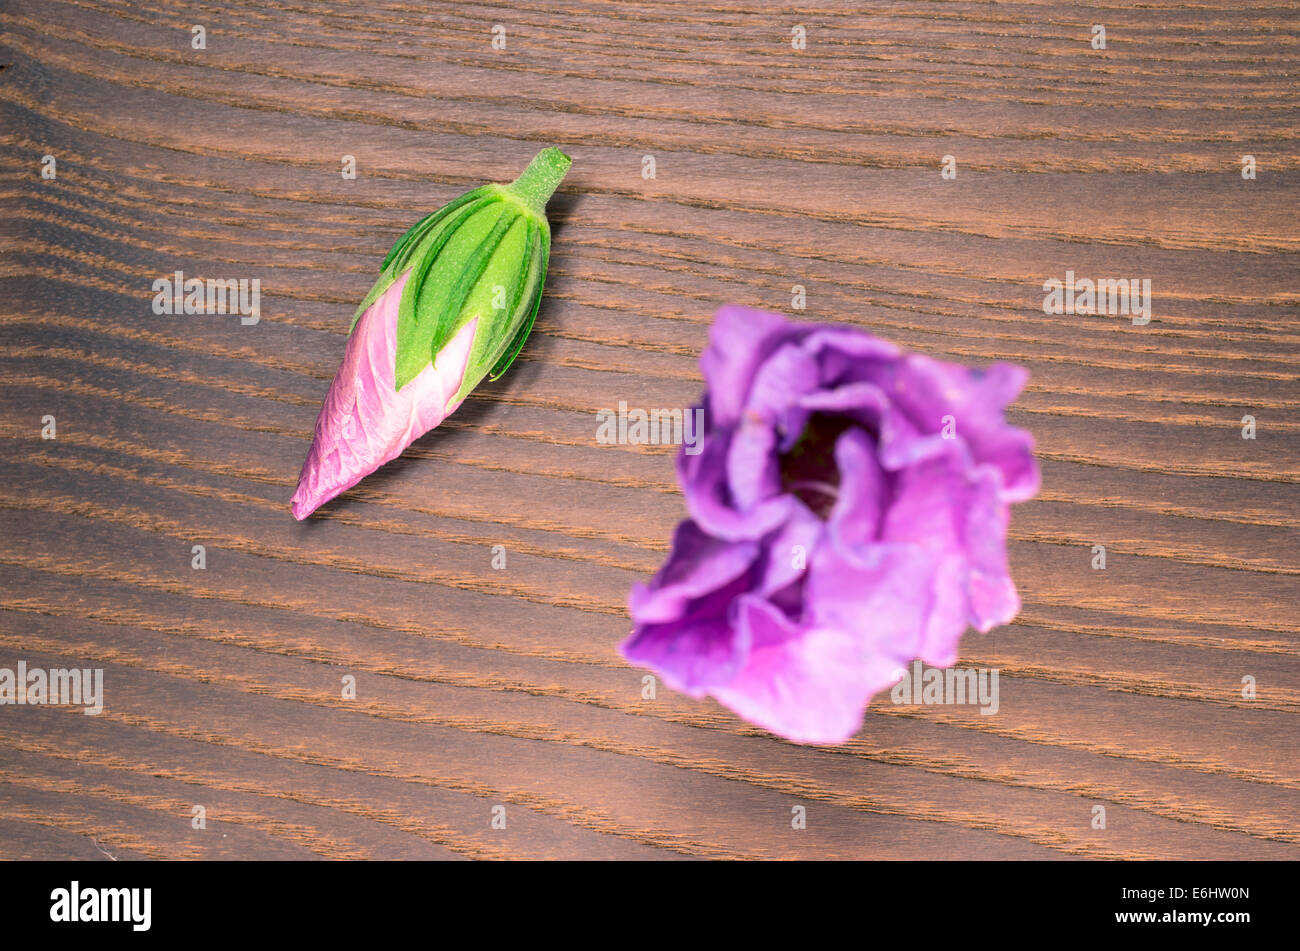 hibiscus cannabinus blossom on a wood surface Stock Photo